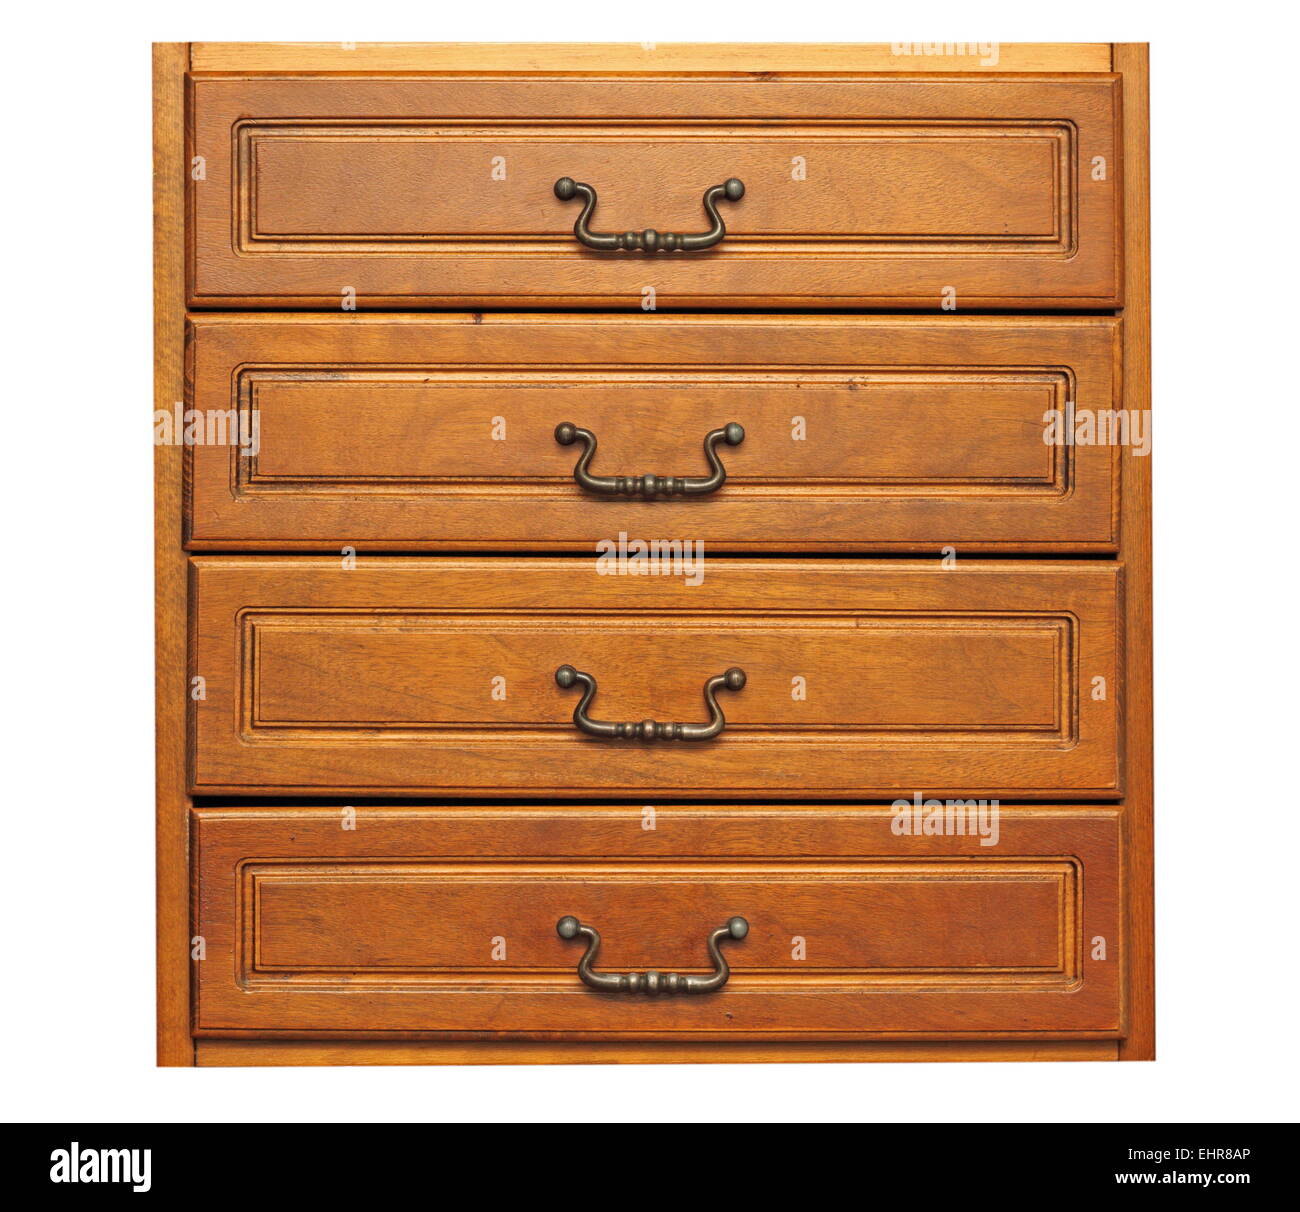 detail of decorated furniture drawers Stock Photo